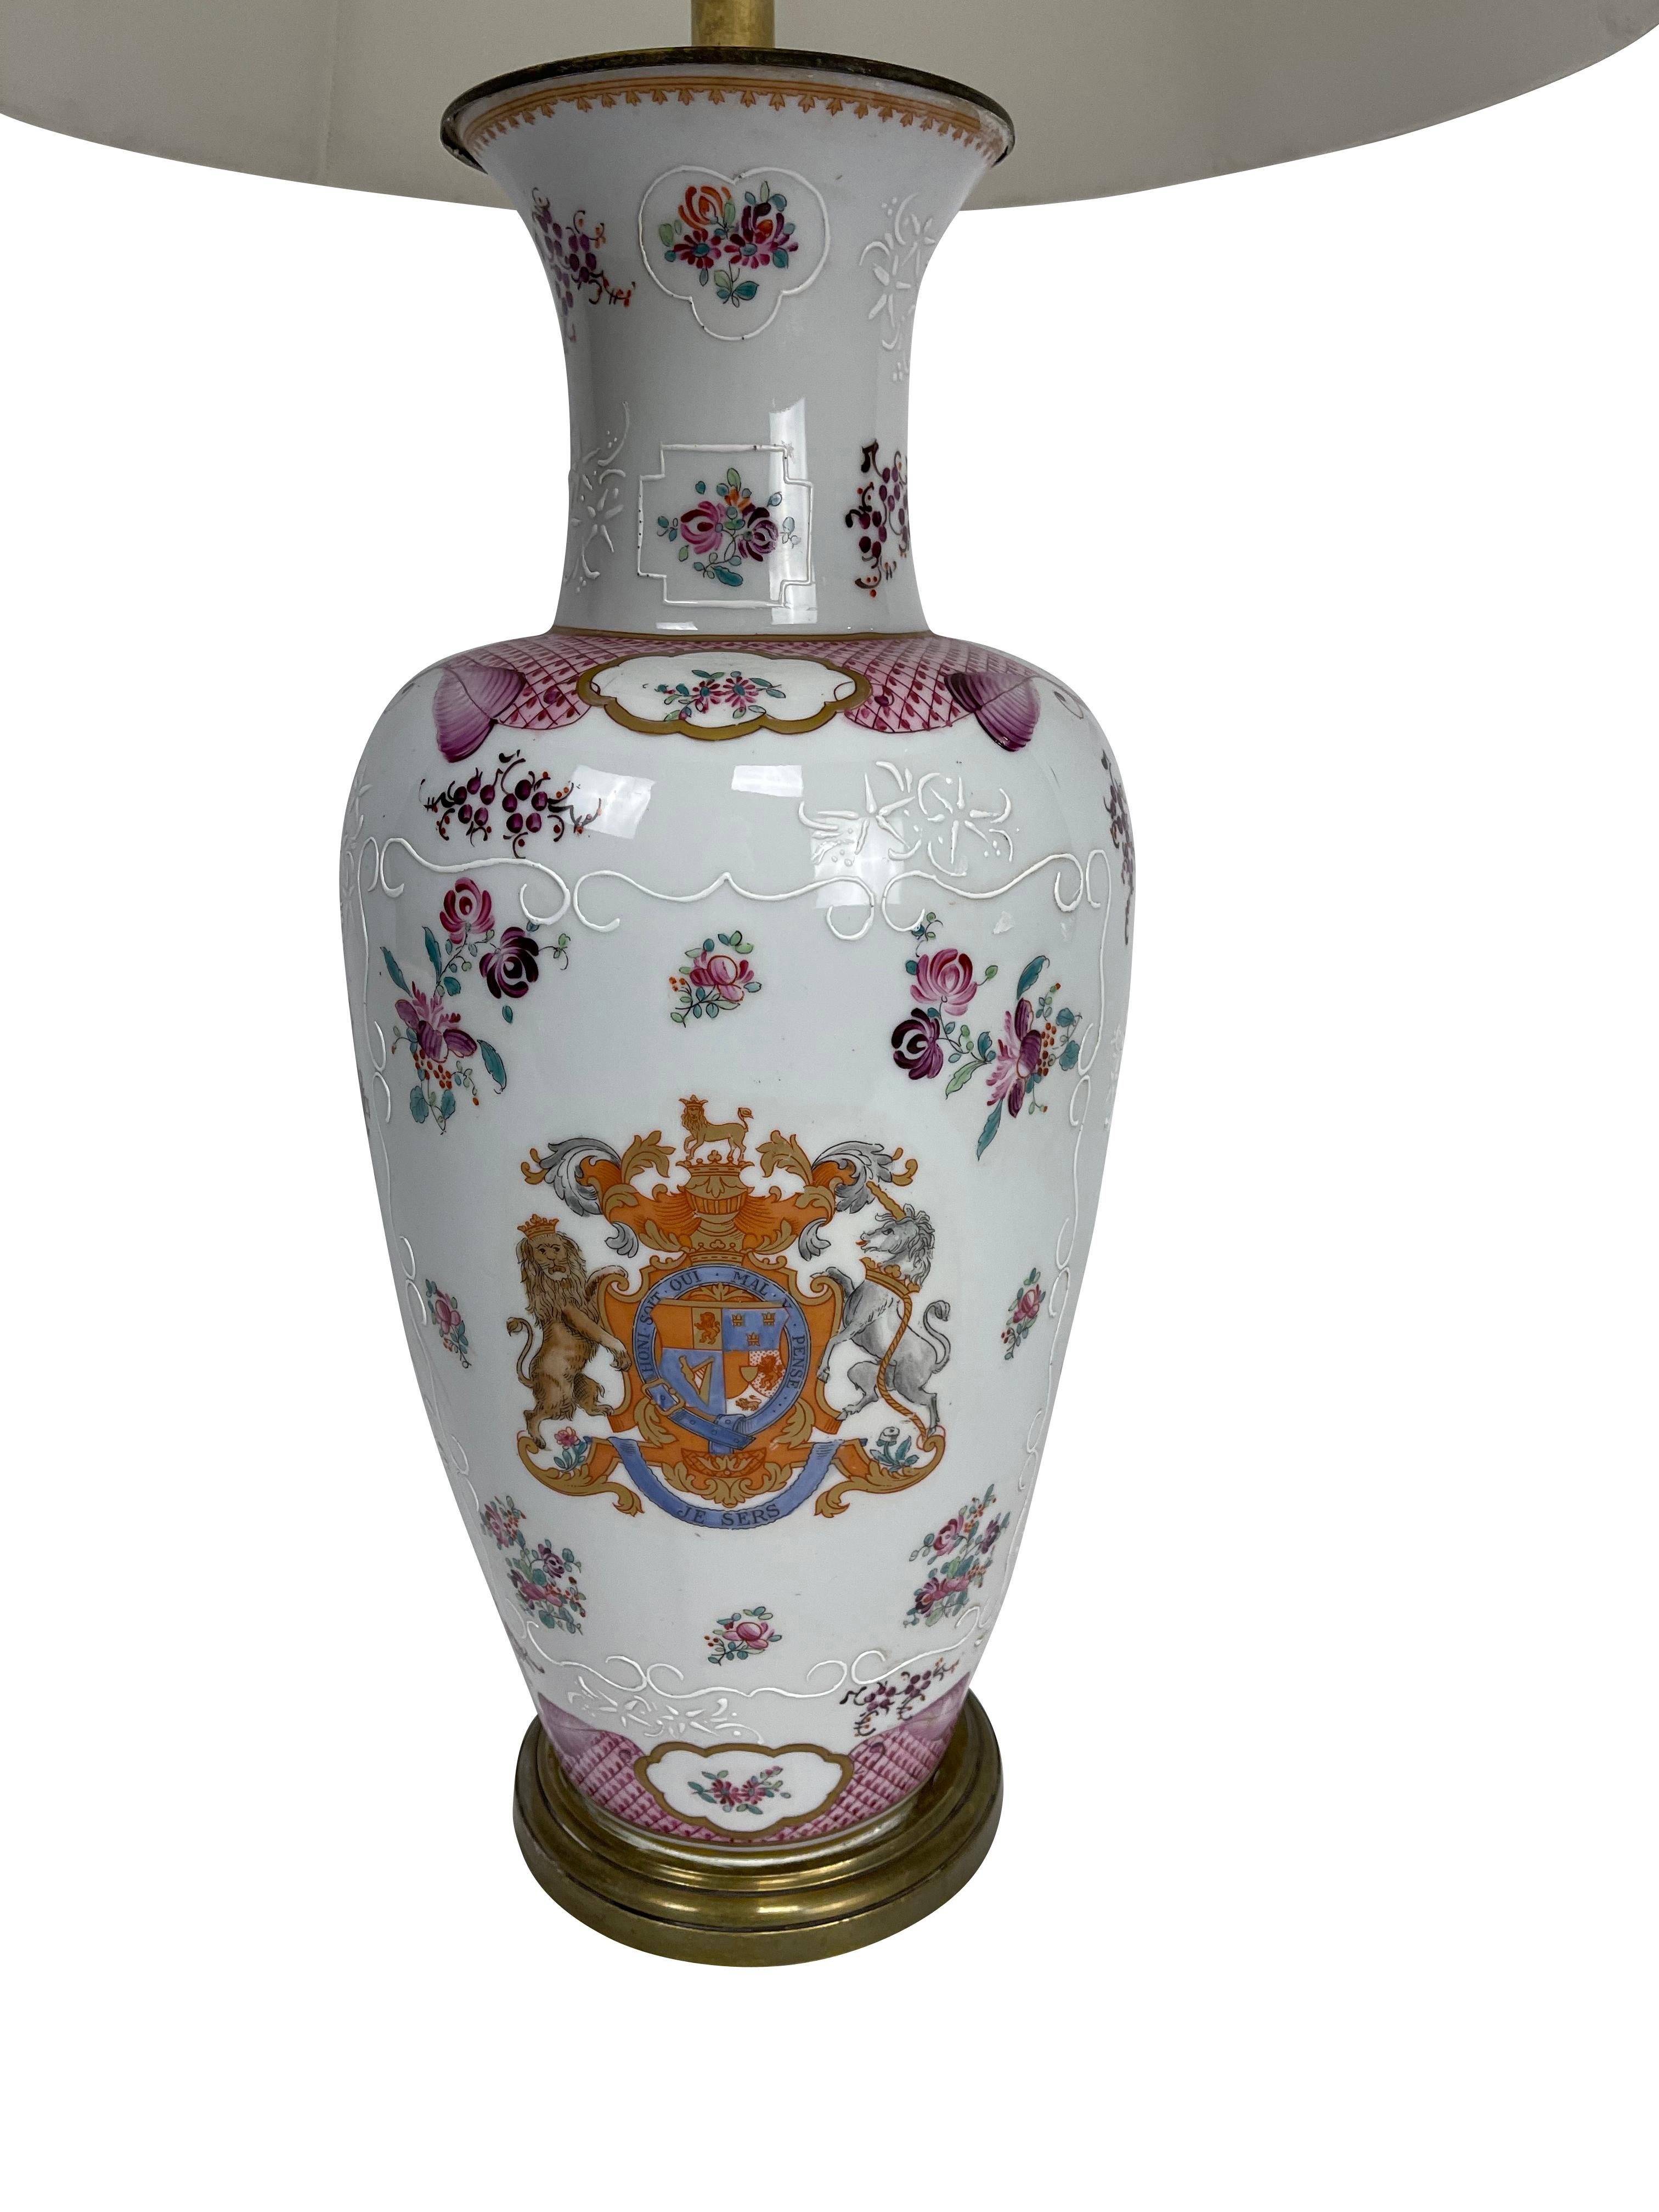 A white Chinese export baluster form Samson Armorial lamp decorated with the Order of the Garter symbol in pink blue, and orange. Order of The Garter is an order of chivalry founded by Edward III of England in 1348. It is the most senior order of